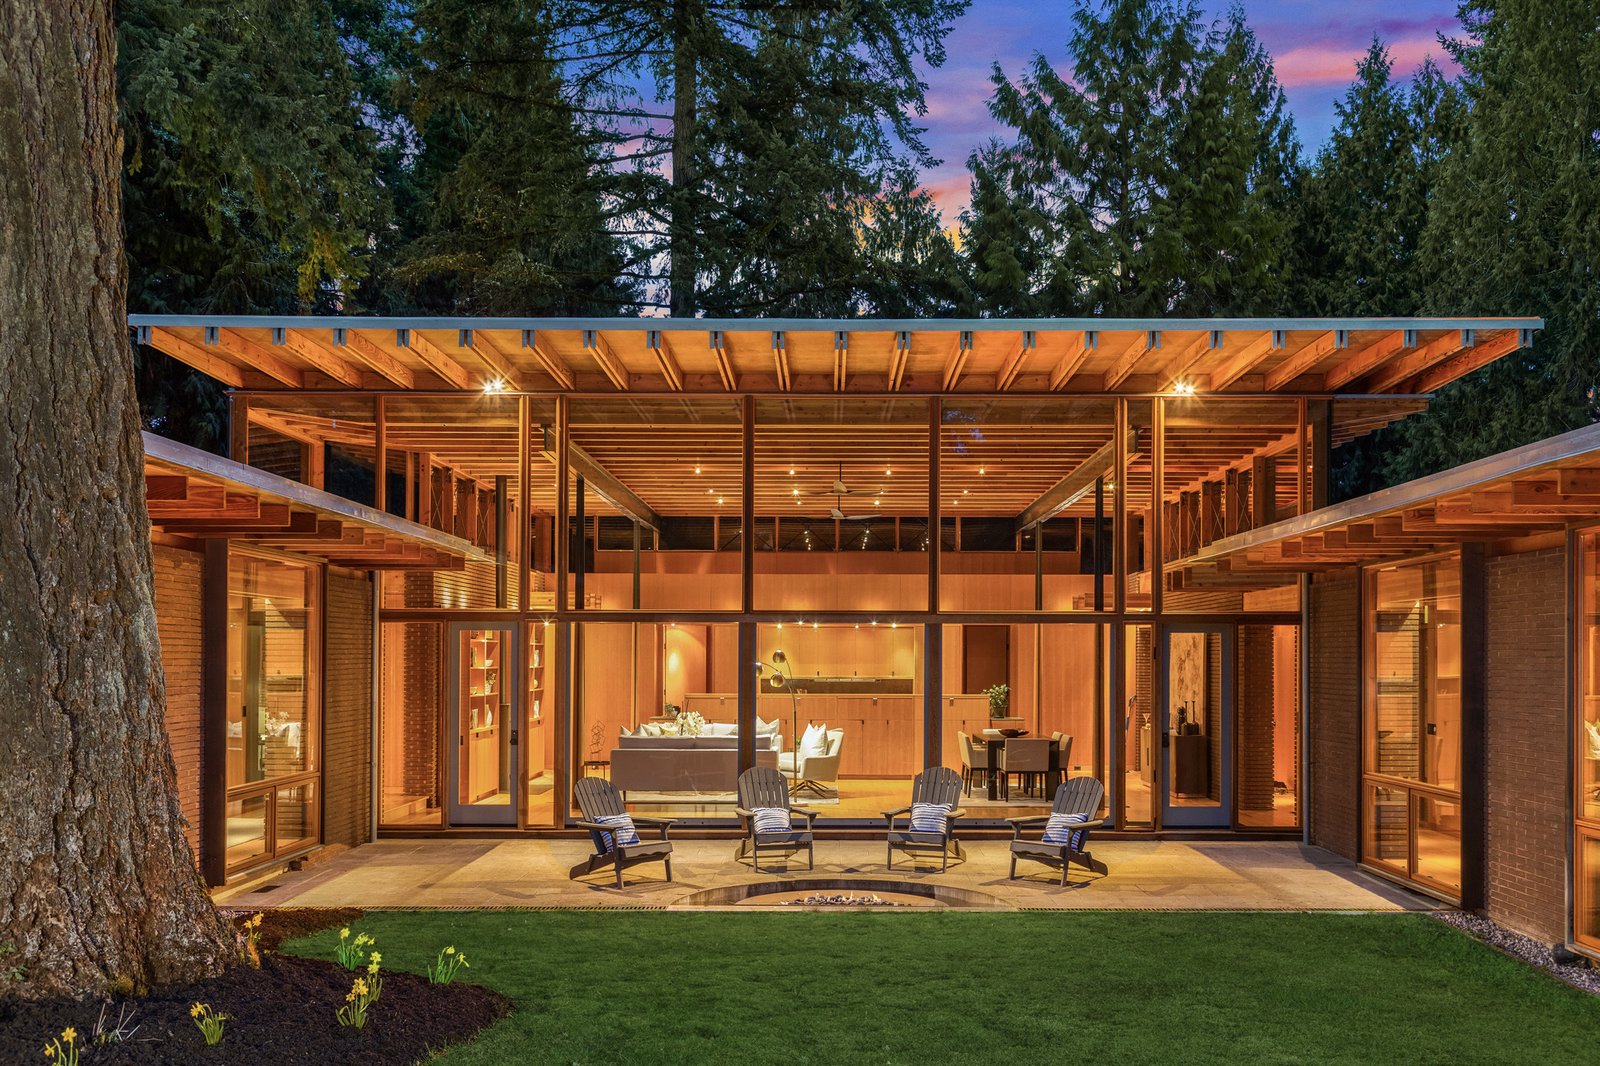 A patio connects the two private wings and the central public area. About the firm's philosophy as embodied by this project, Cutler adds: "Nature takes on a will and spirit of its own in every project. We work to release that spirit."